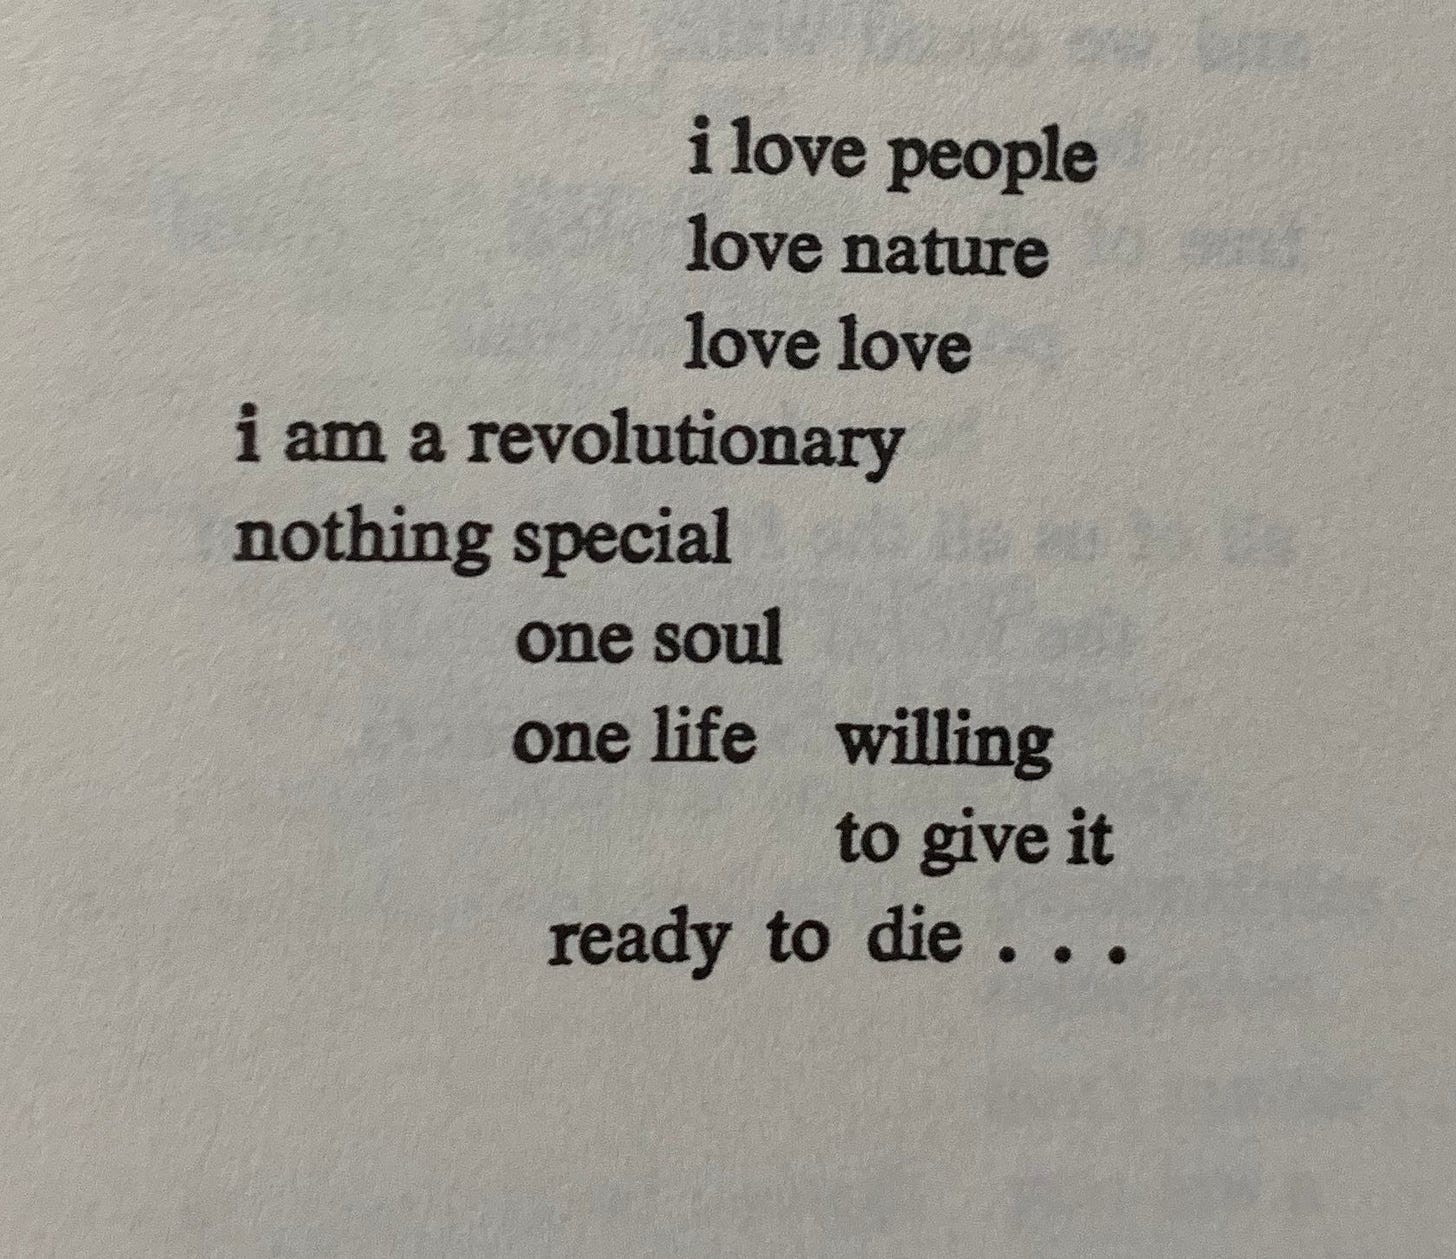 A poem by Ericka Higgins, that reads:
i love people
love nature
love love
i am a revolutionary
nothing special
one soul
one life willing
to give it
ready to die ...